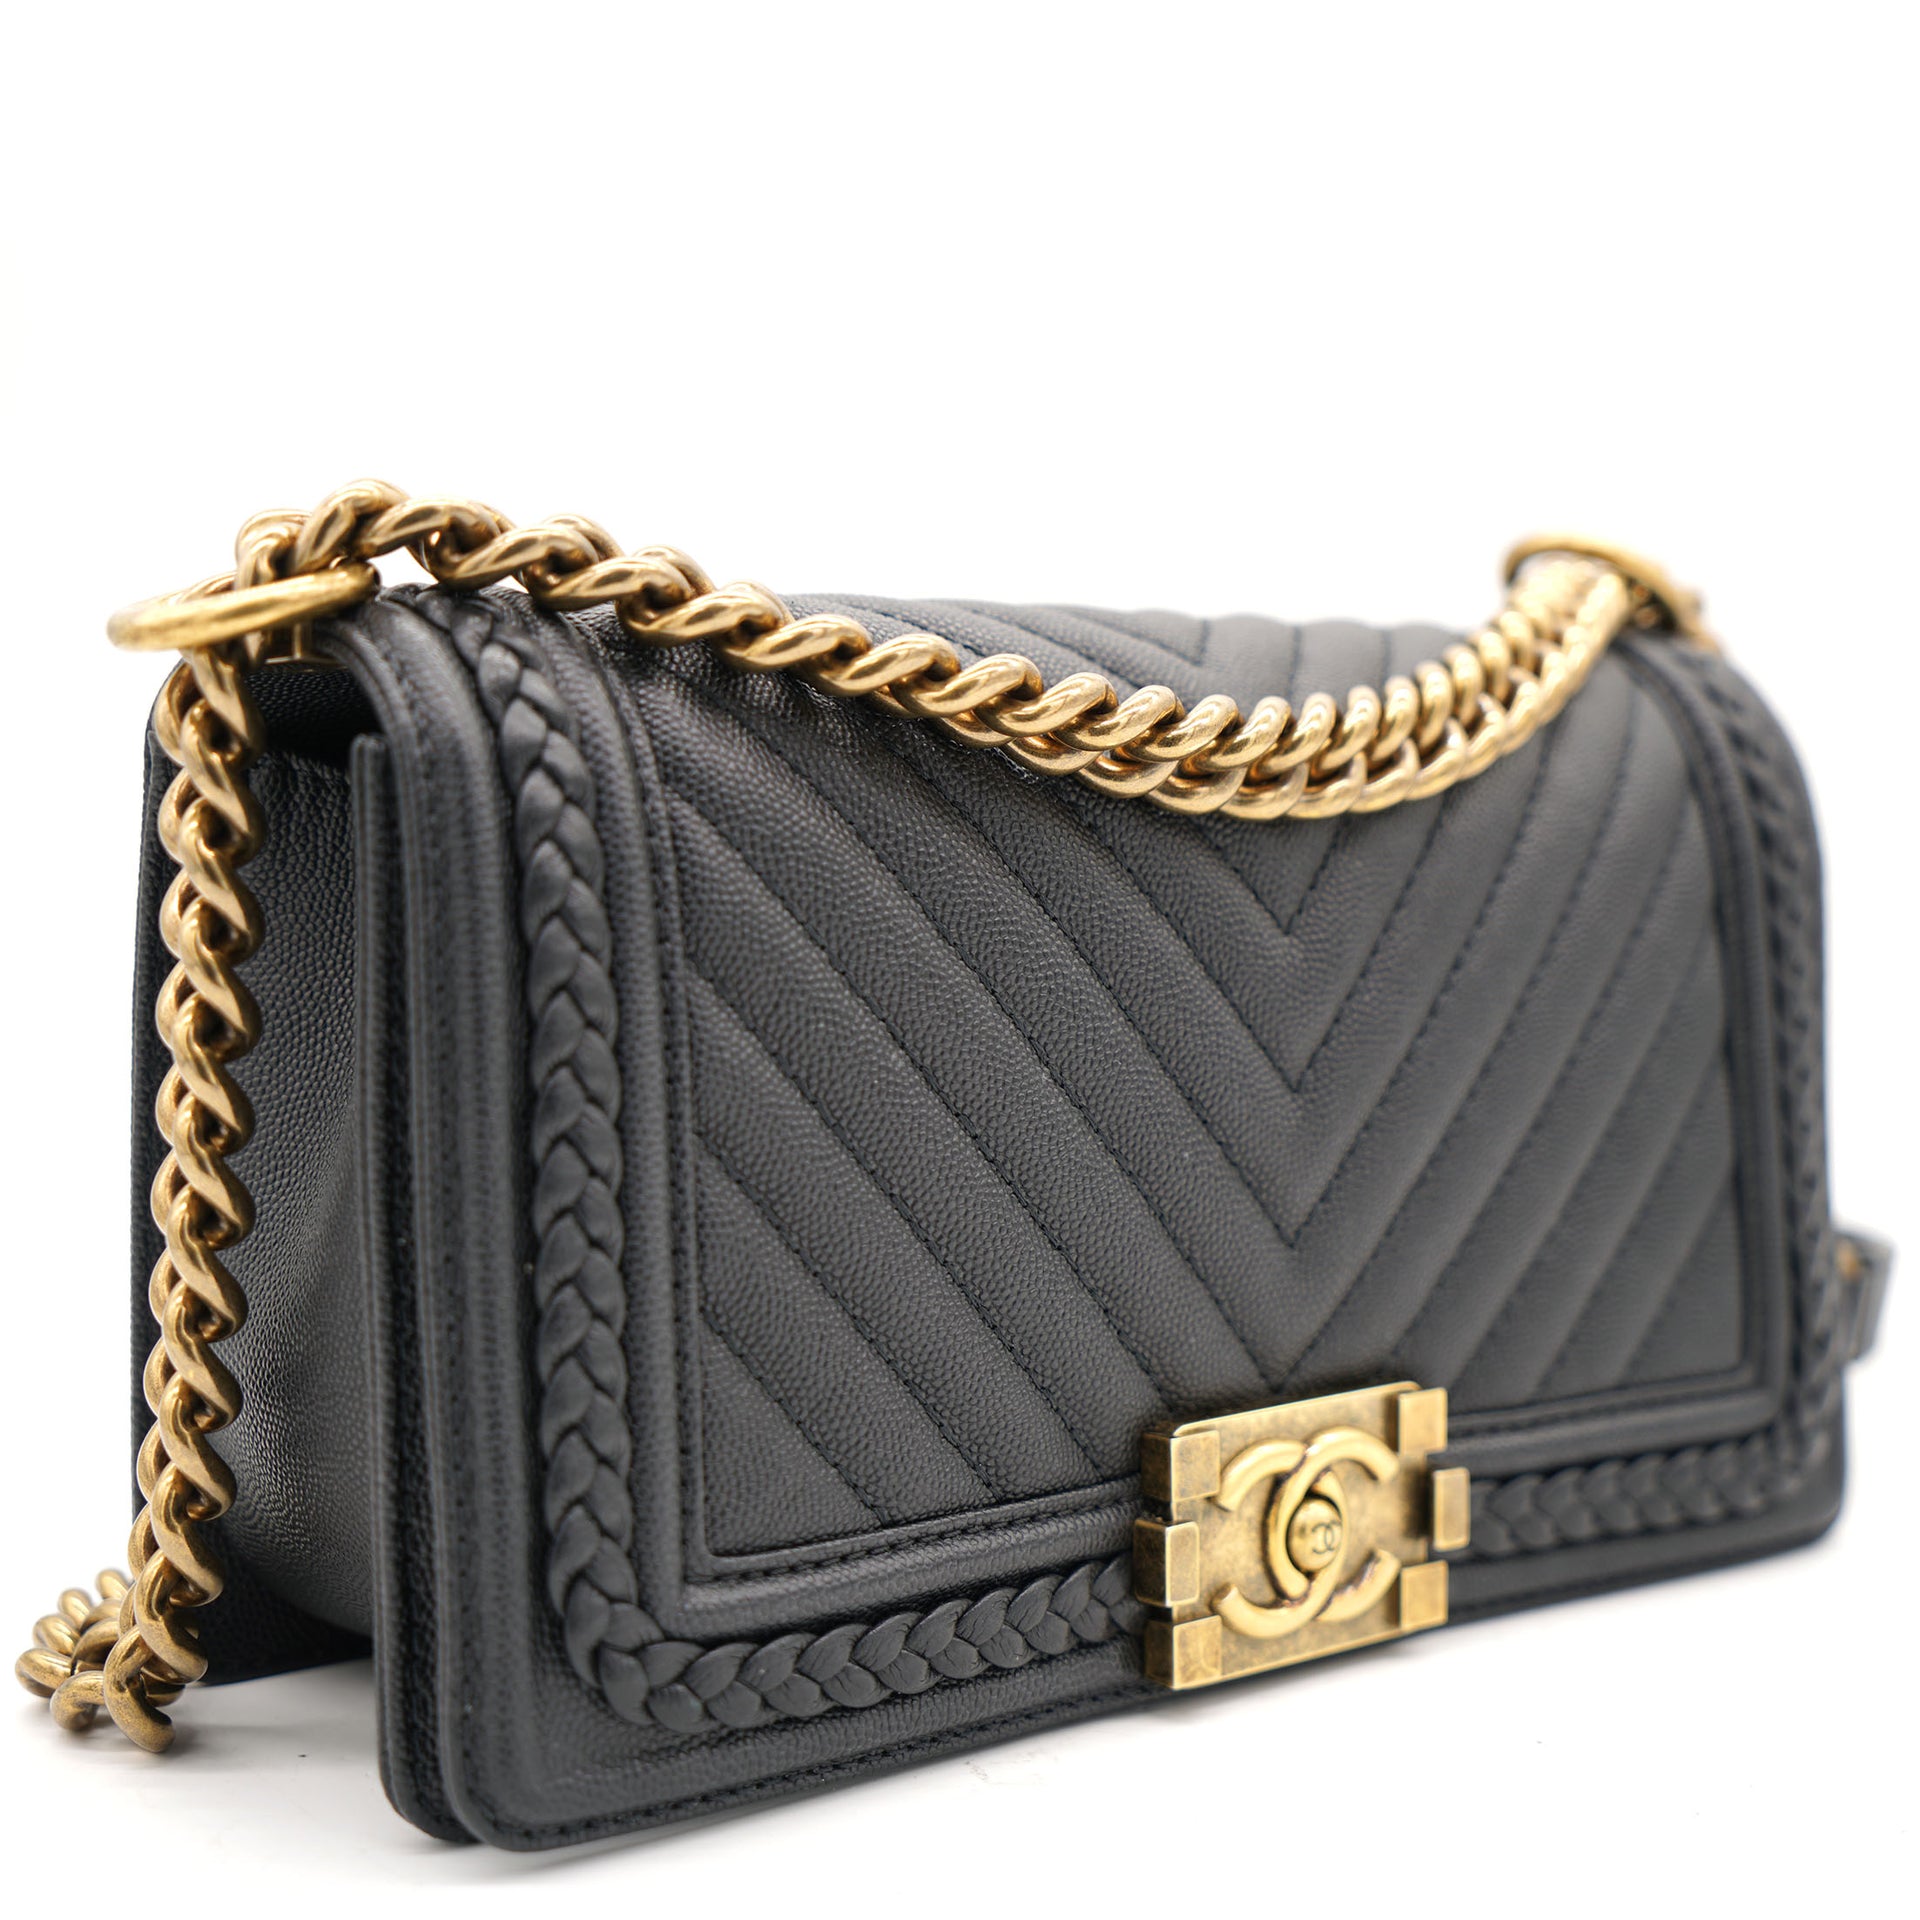 Chanel Black Quilted Leather and Twisted Leather Trim Old Medium